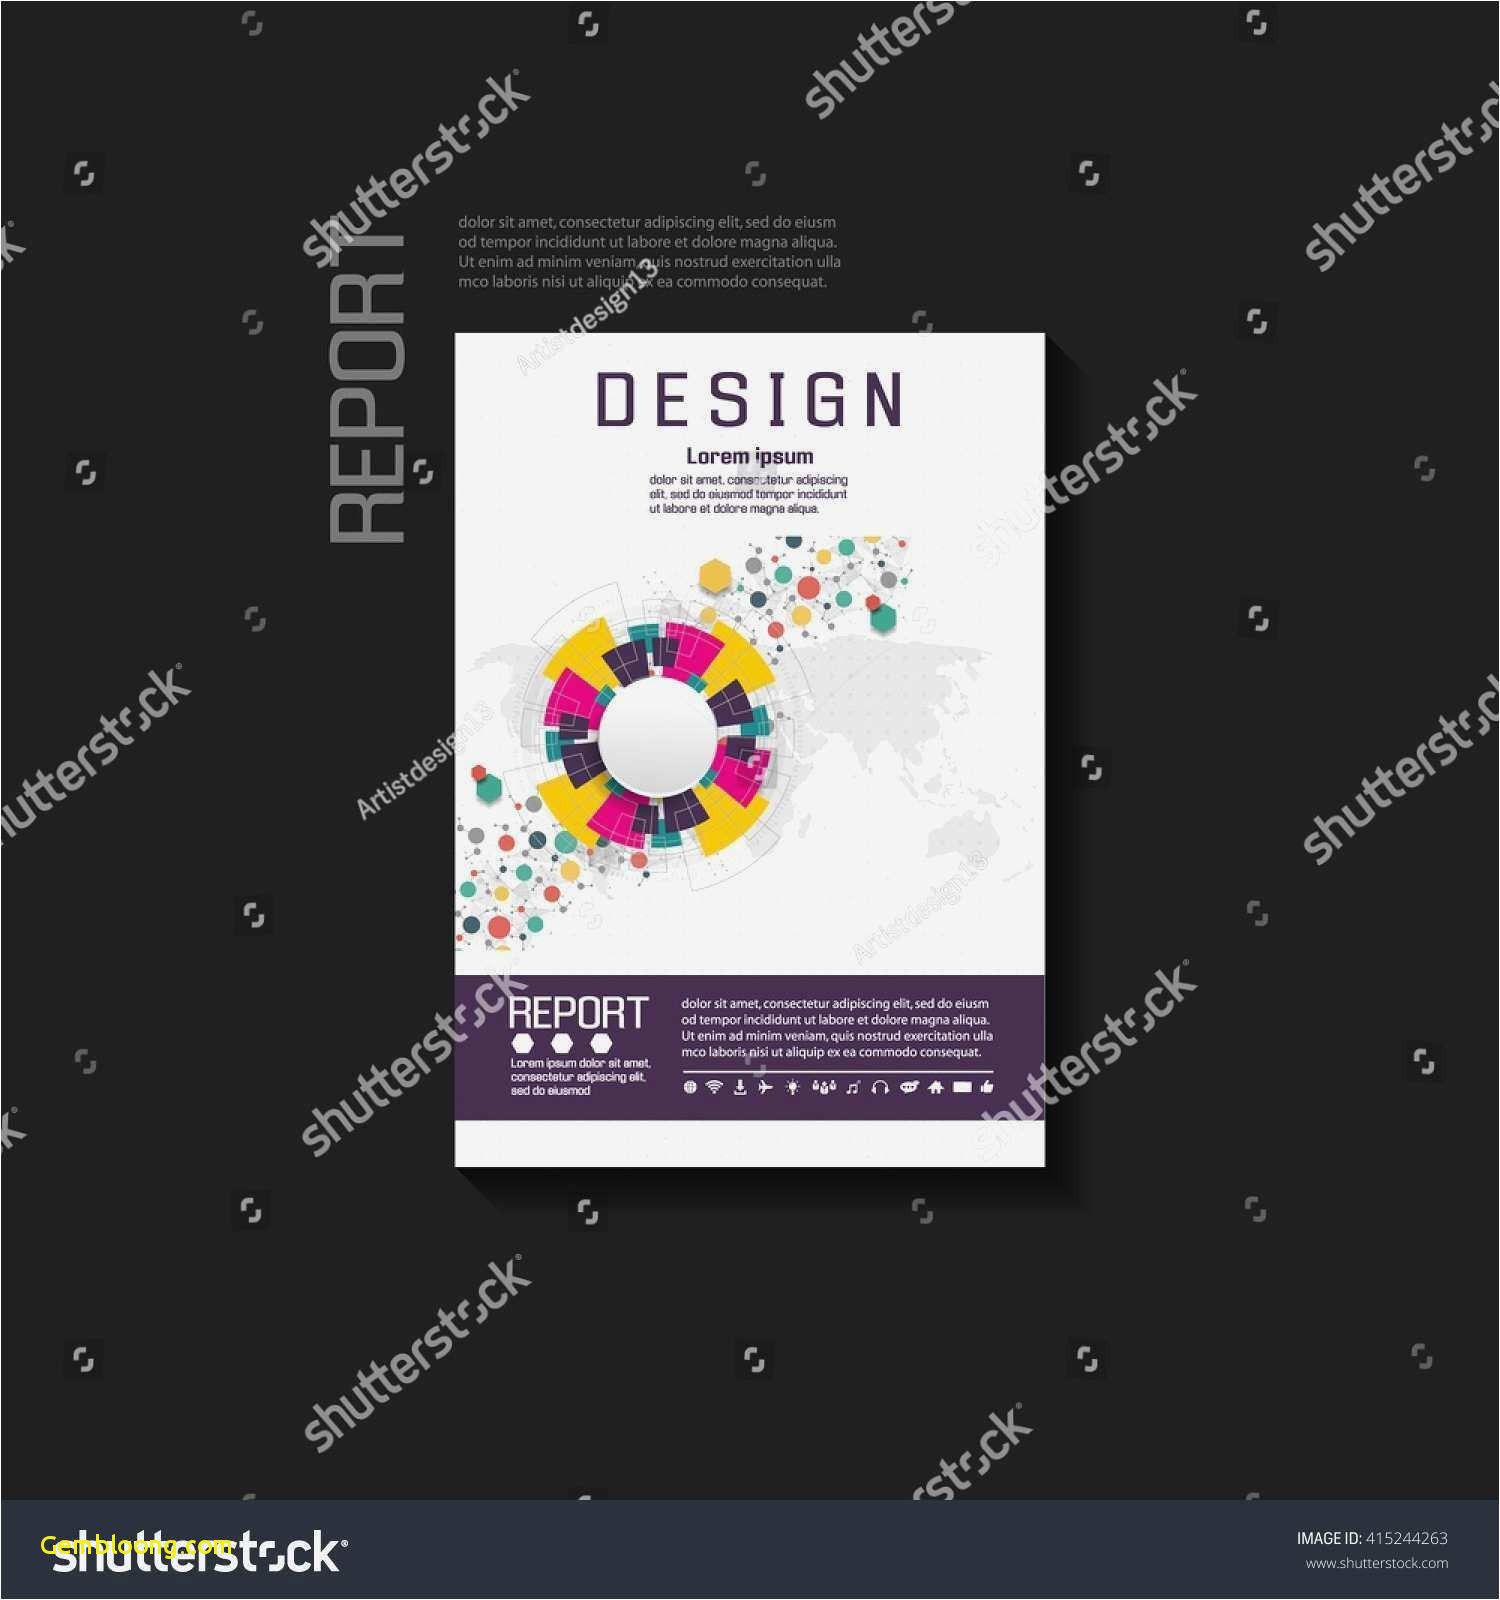 Free Business Card Psd Templates Valid Business Card Shop Of Business Cards Templates Photoshop